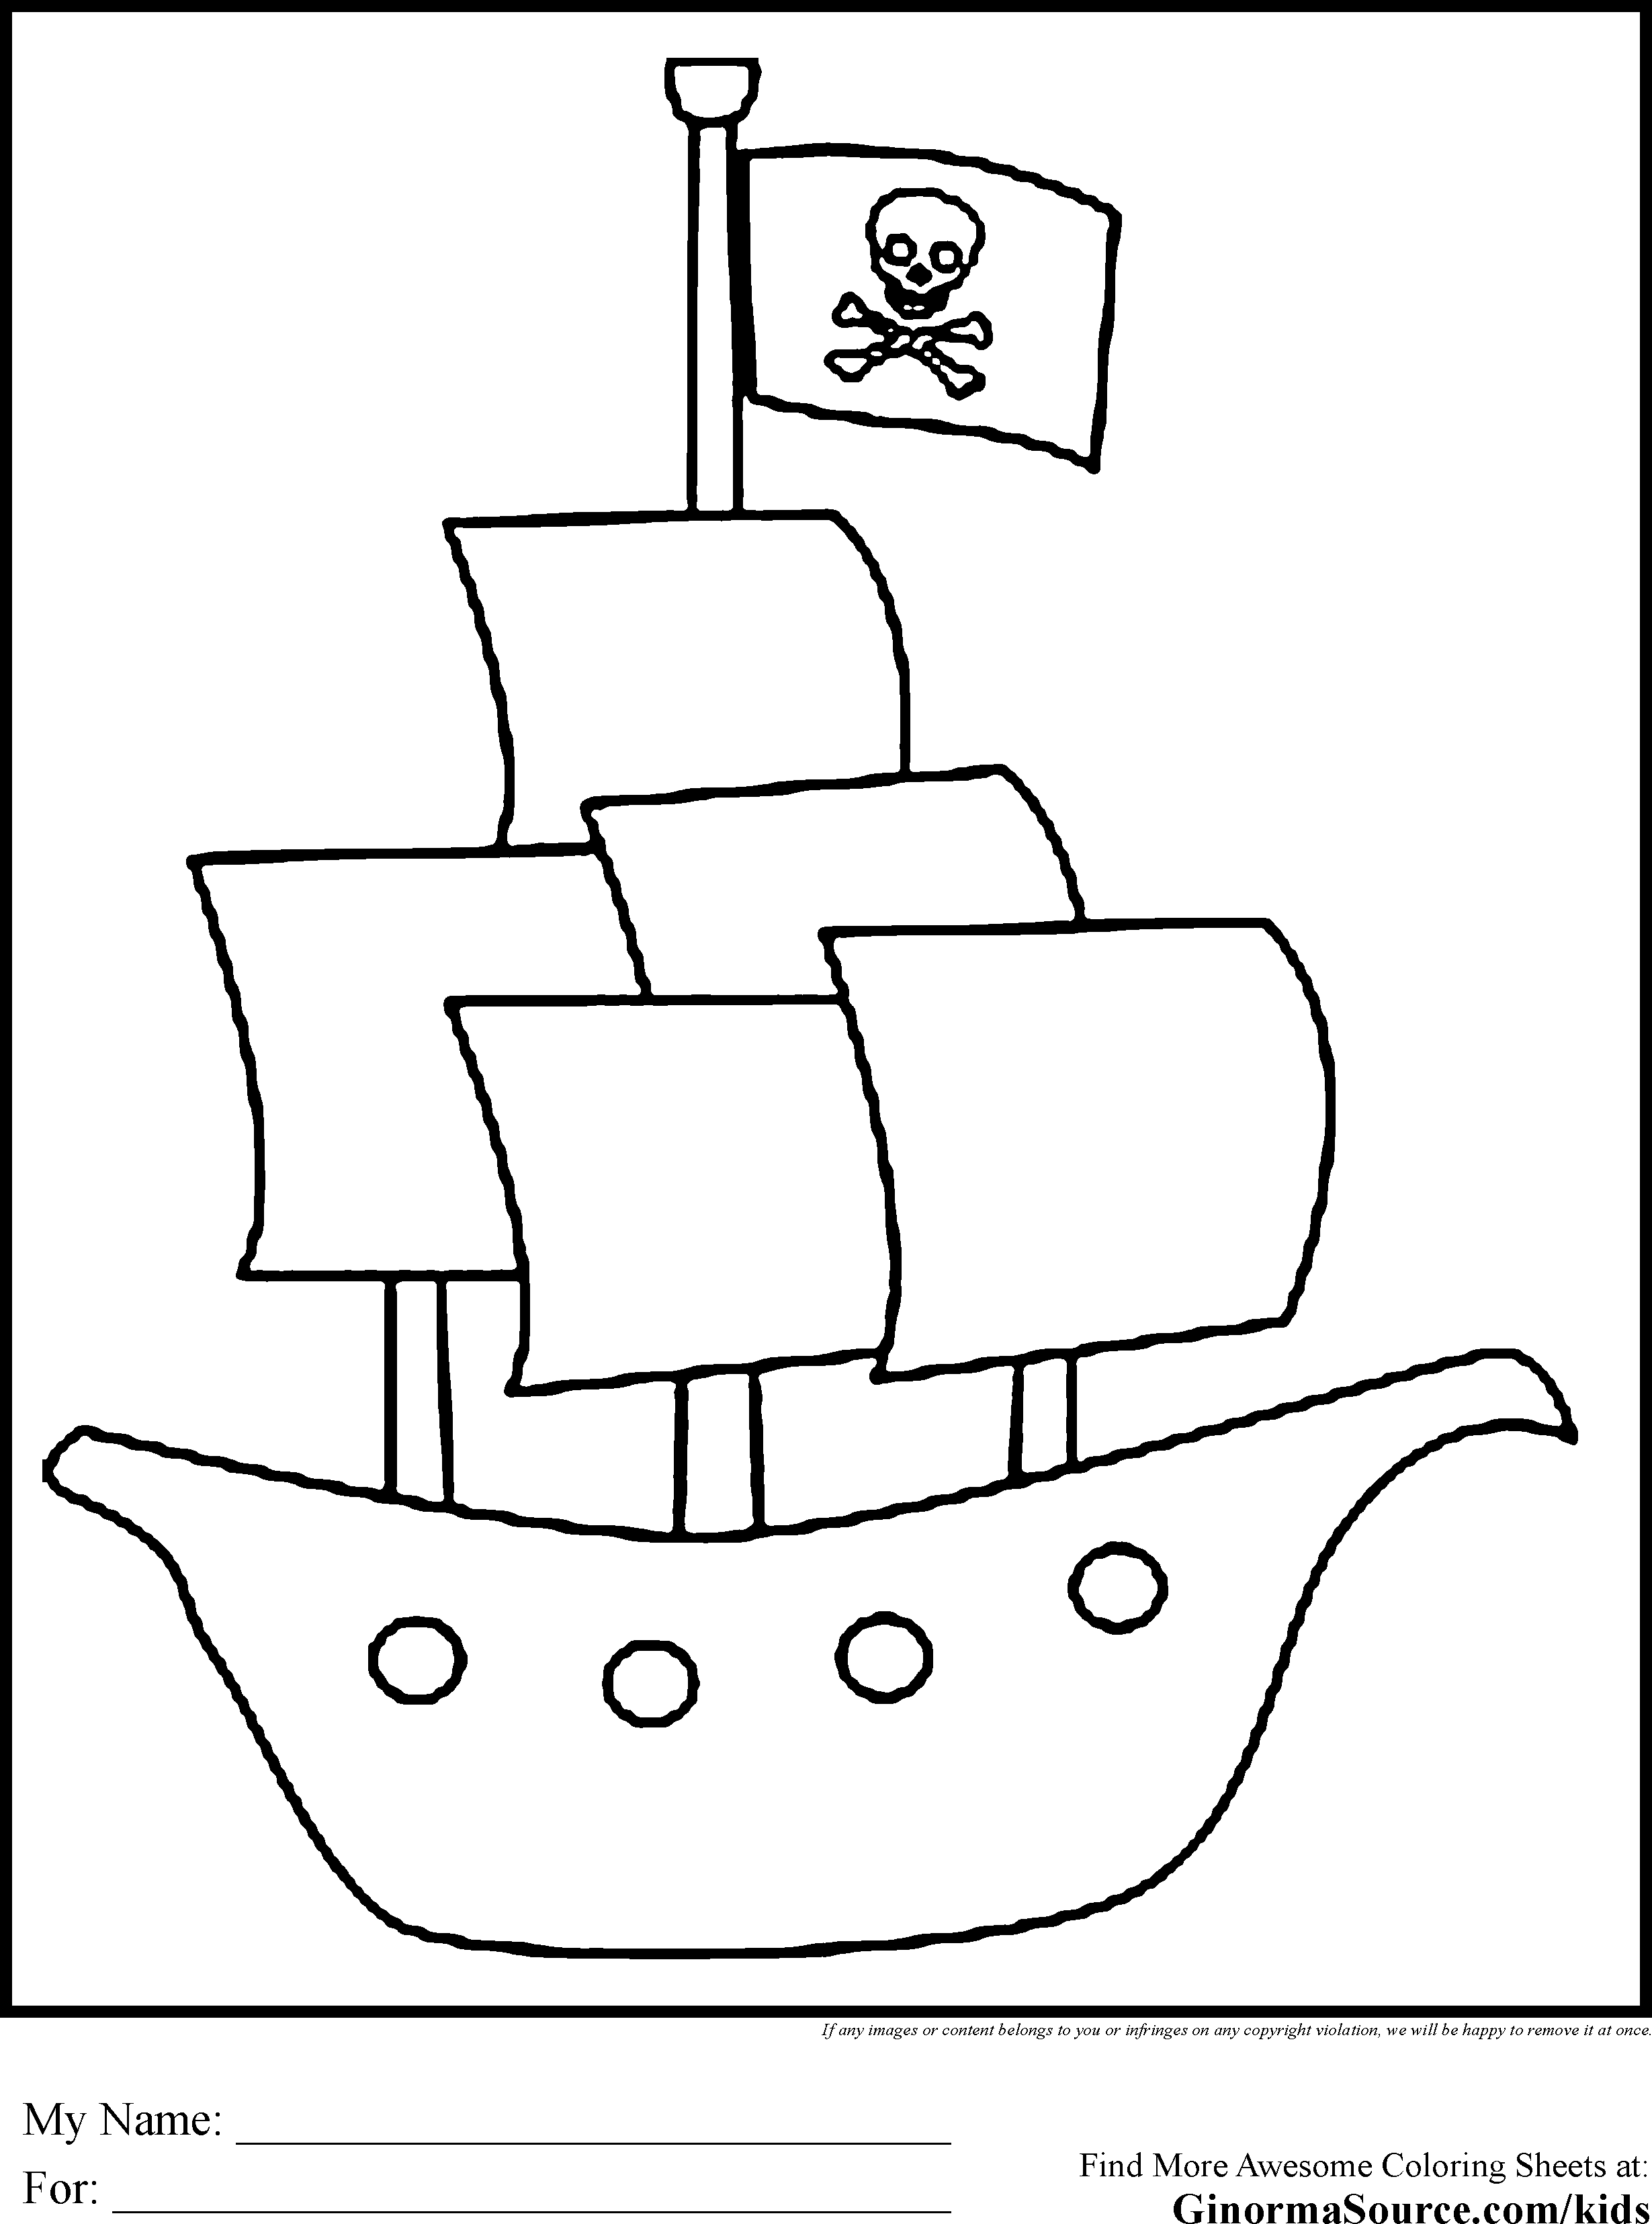 pirate coloring pages for kids printable treasure map coloring pages getcoloringpagescom for pirate coloring printable pages kids 